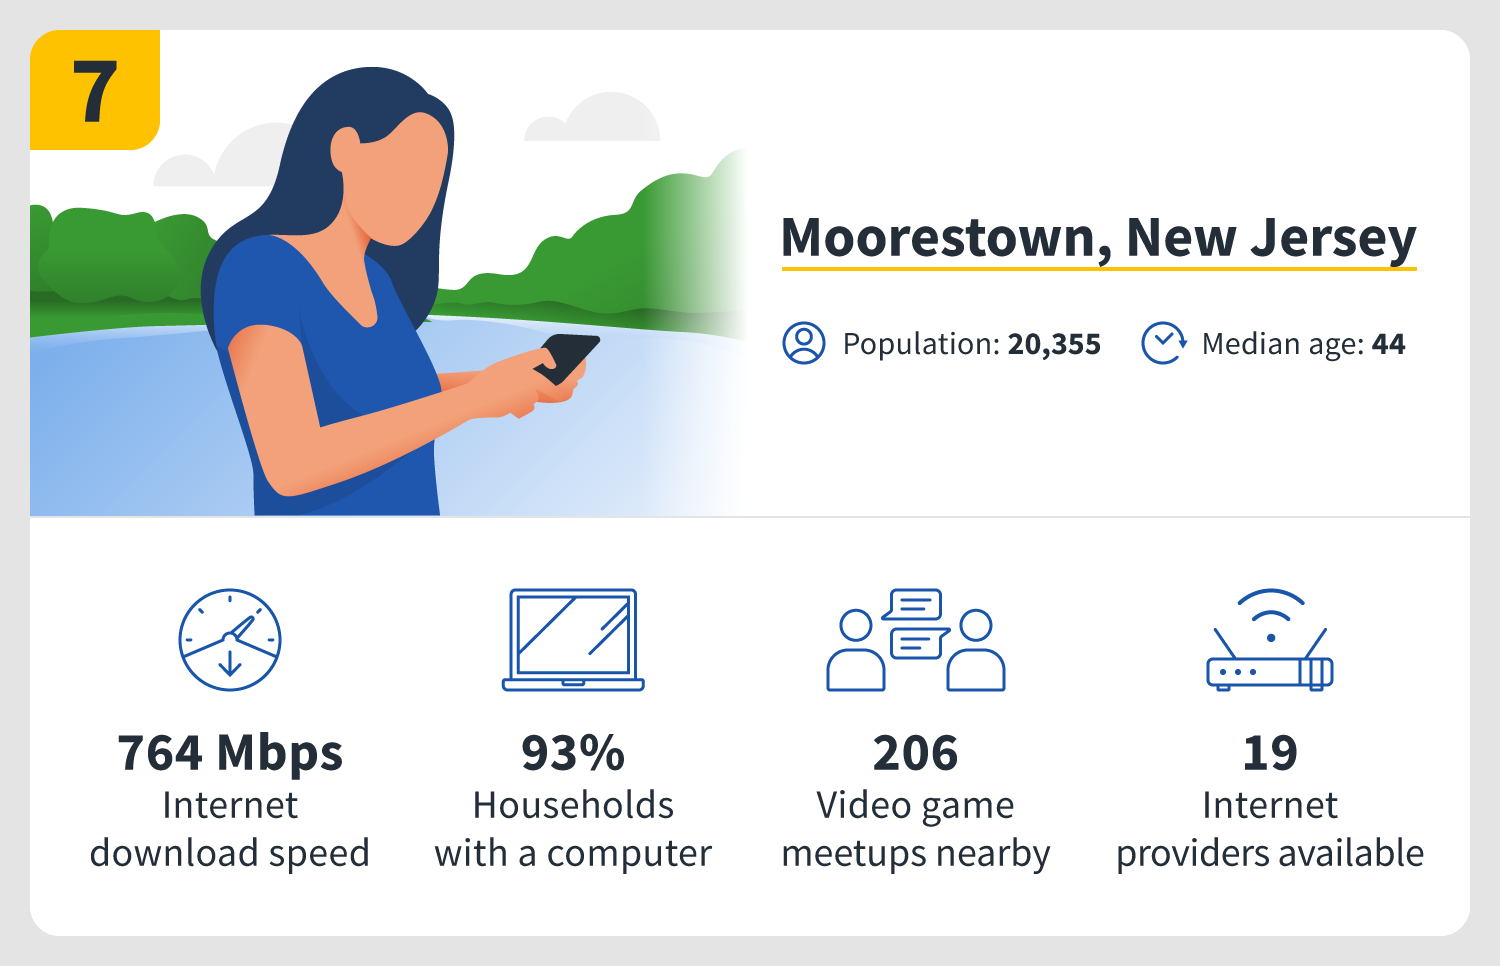 Moorestown, New Jersey, is the seventh best city for gaming in the U.S.